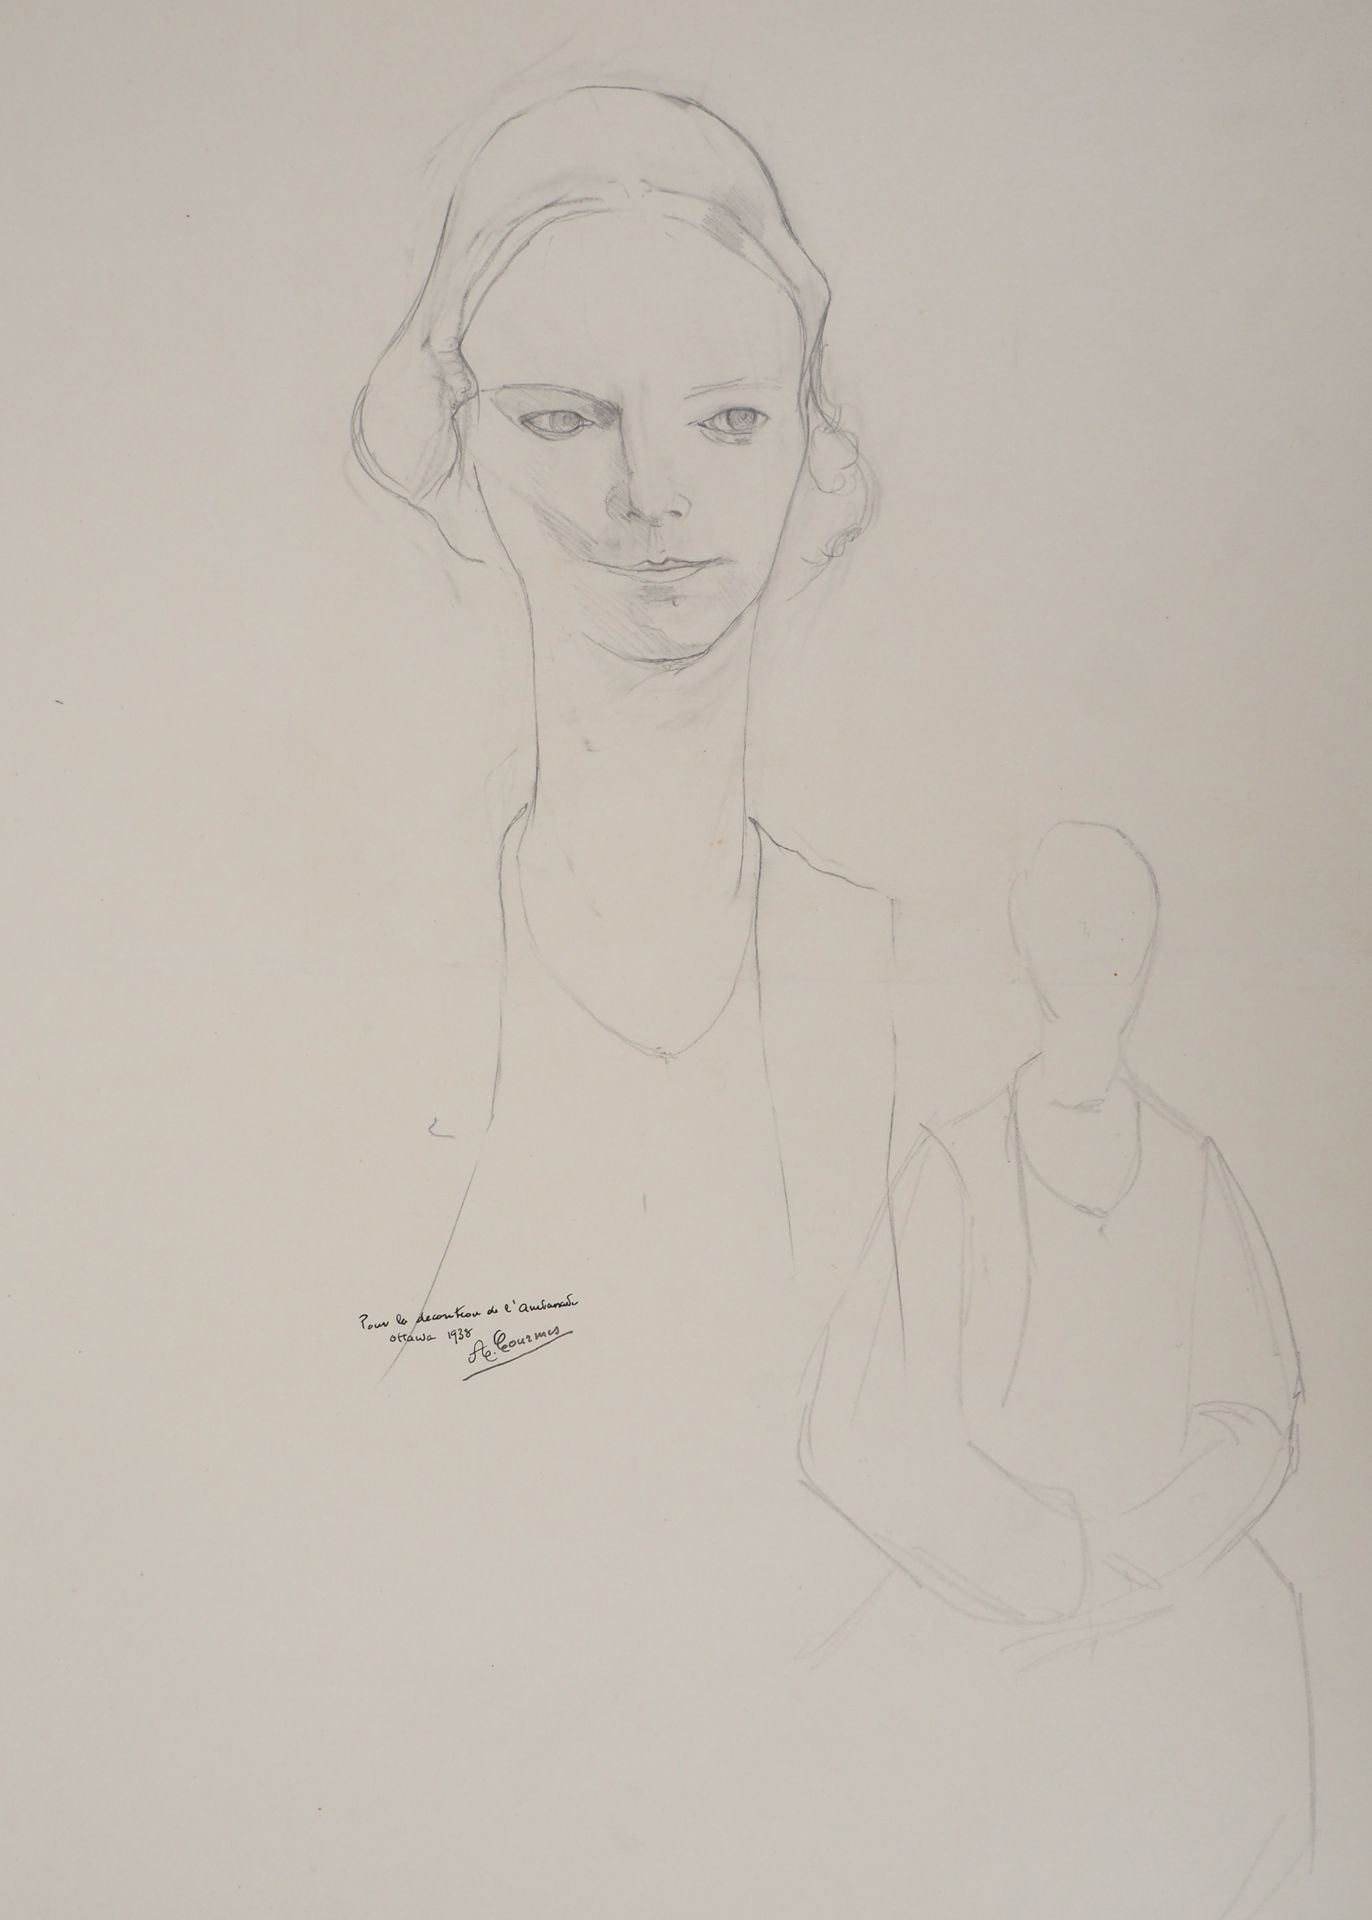 Alfred COURMES Alfred COURMES (1898-1993)

The tender gaze

Pencil drawing

Sign&hellip;